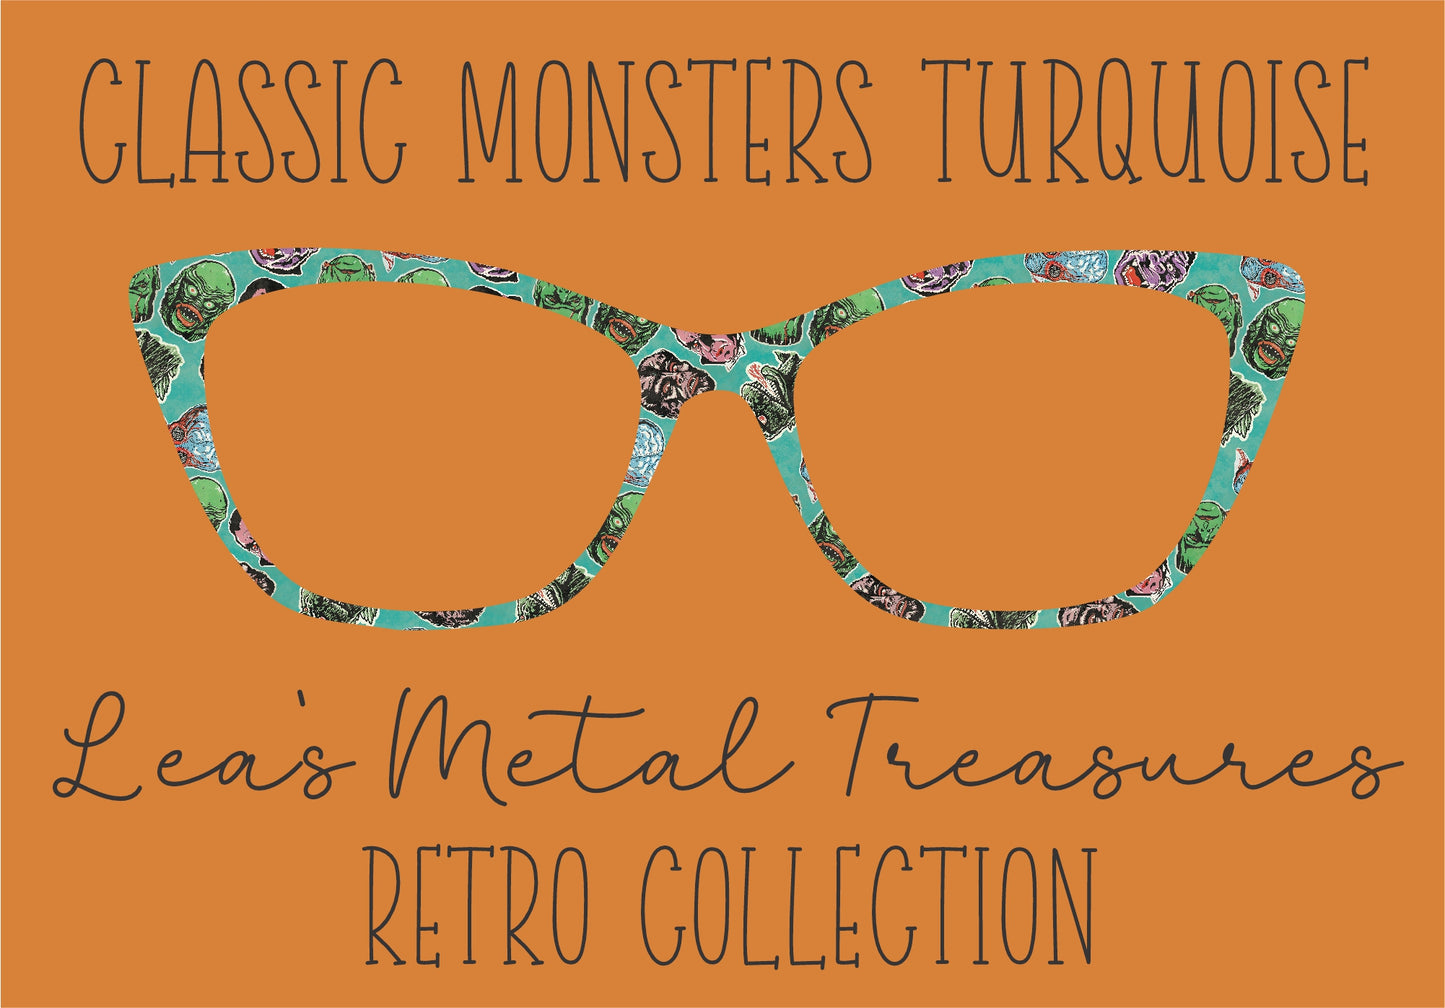 CLASSIC MONSTERS TURQUOISE Eyewear Frame Toppers COMES WITH MAGNETS